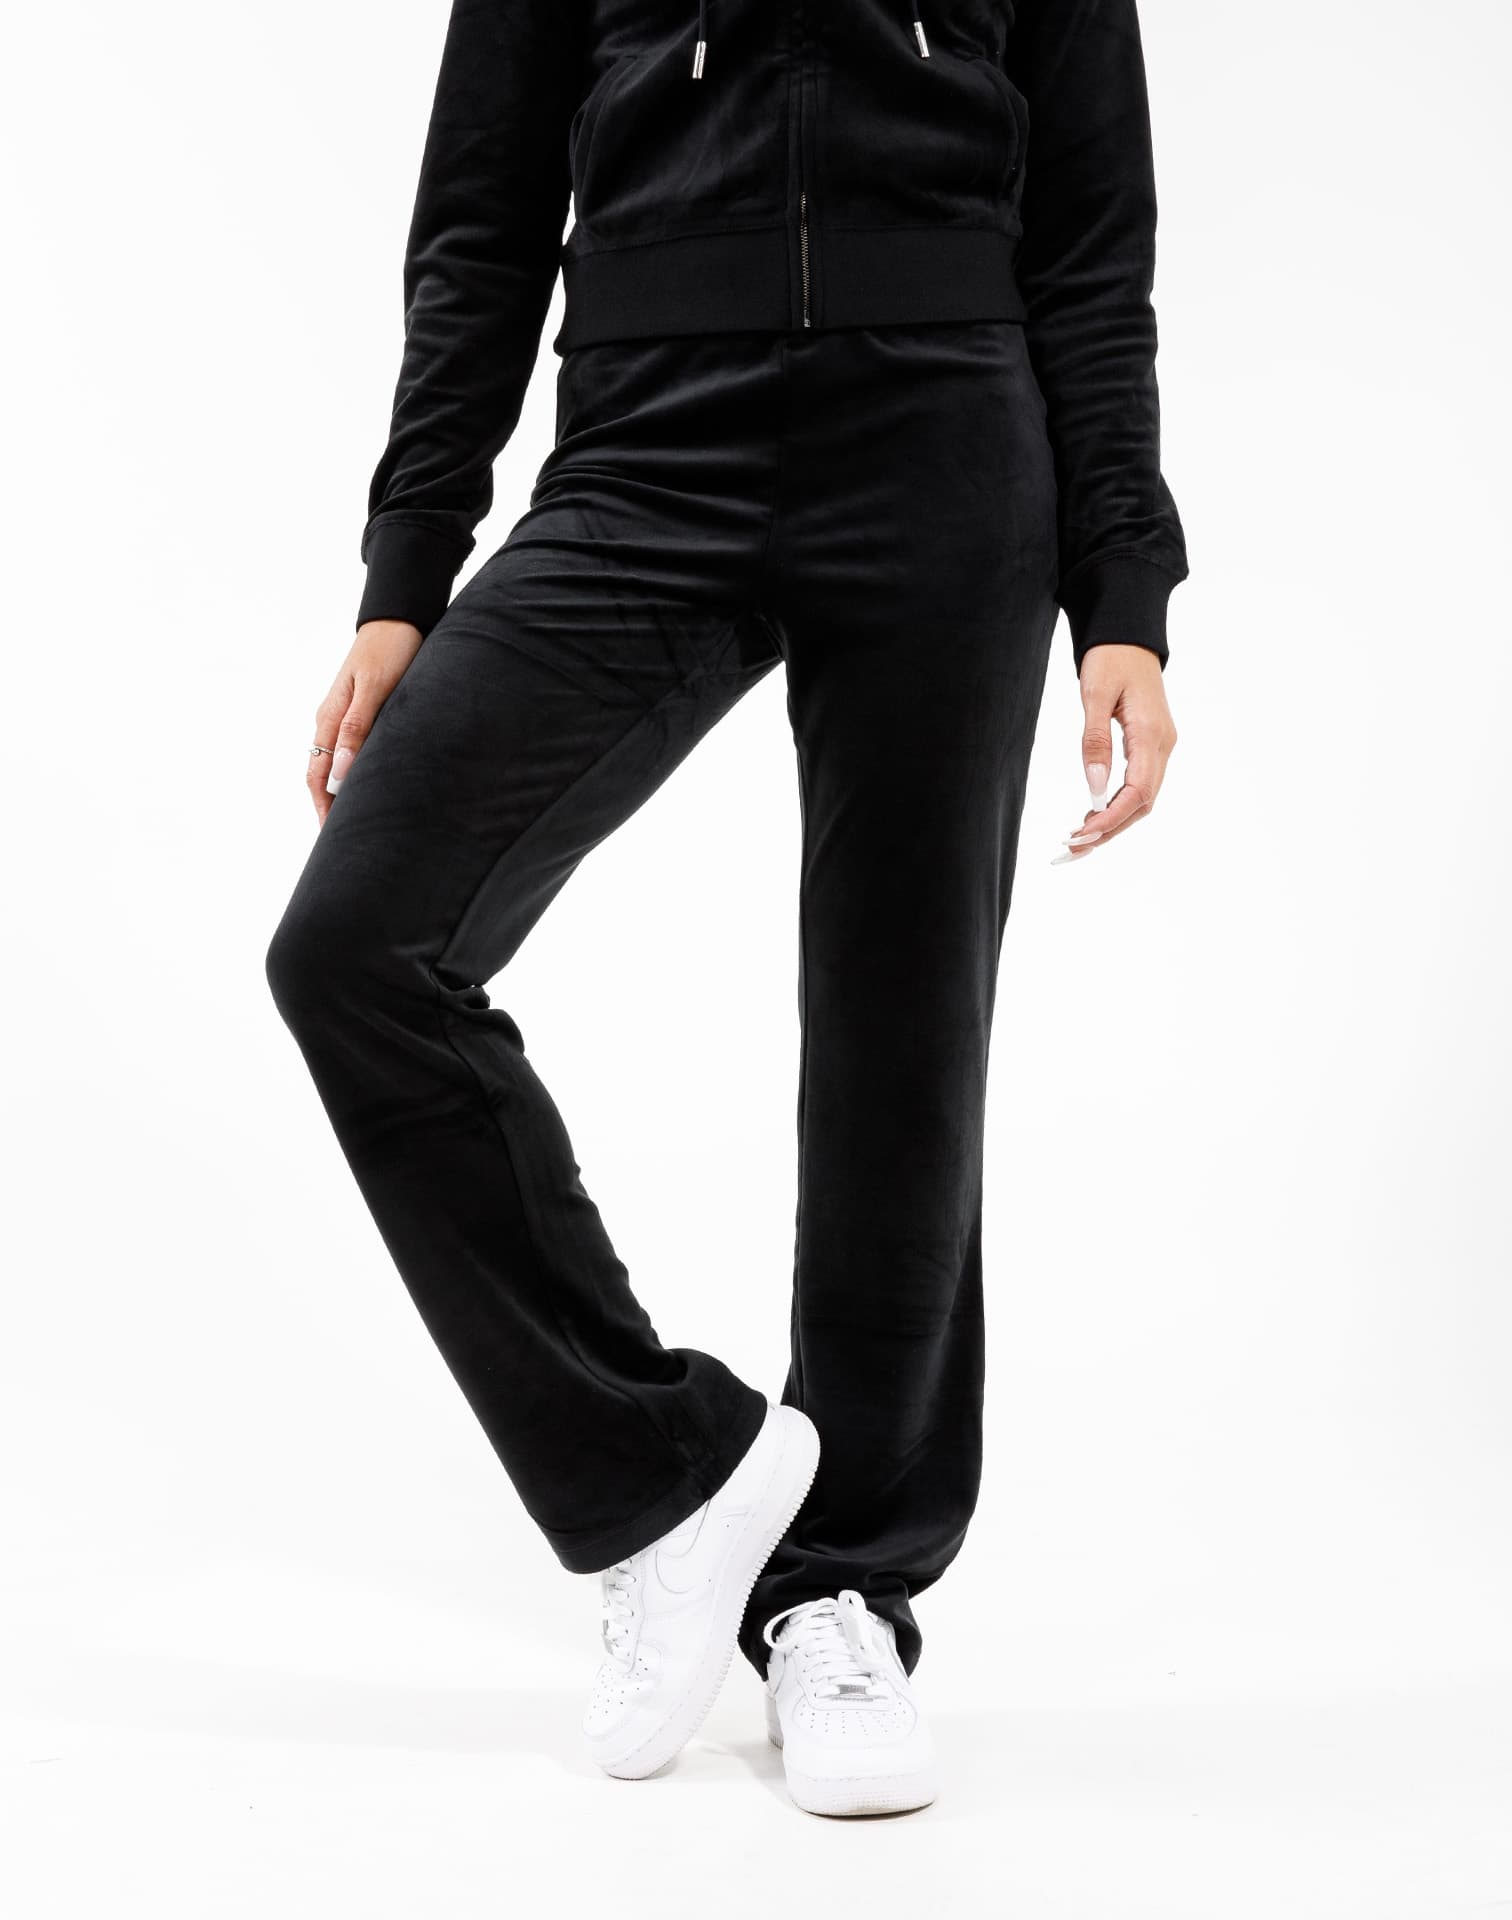 Juicy Couture Rodeo Drive Velour High Rise Track Pants Leggings